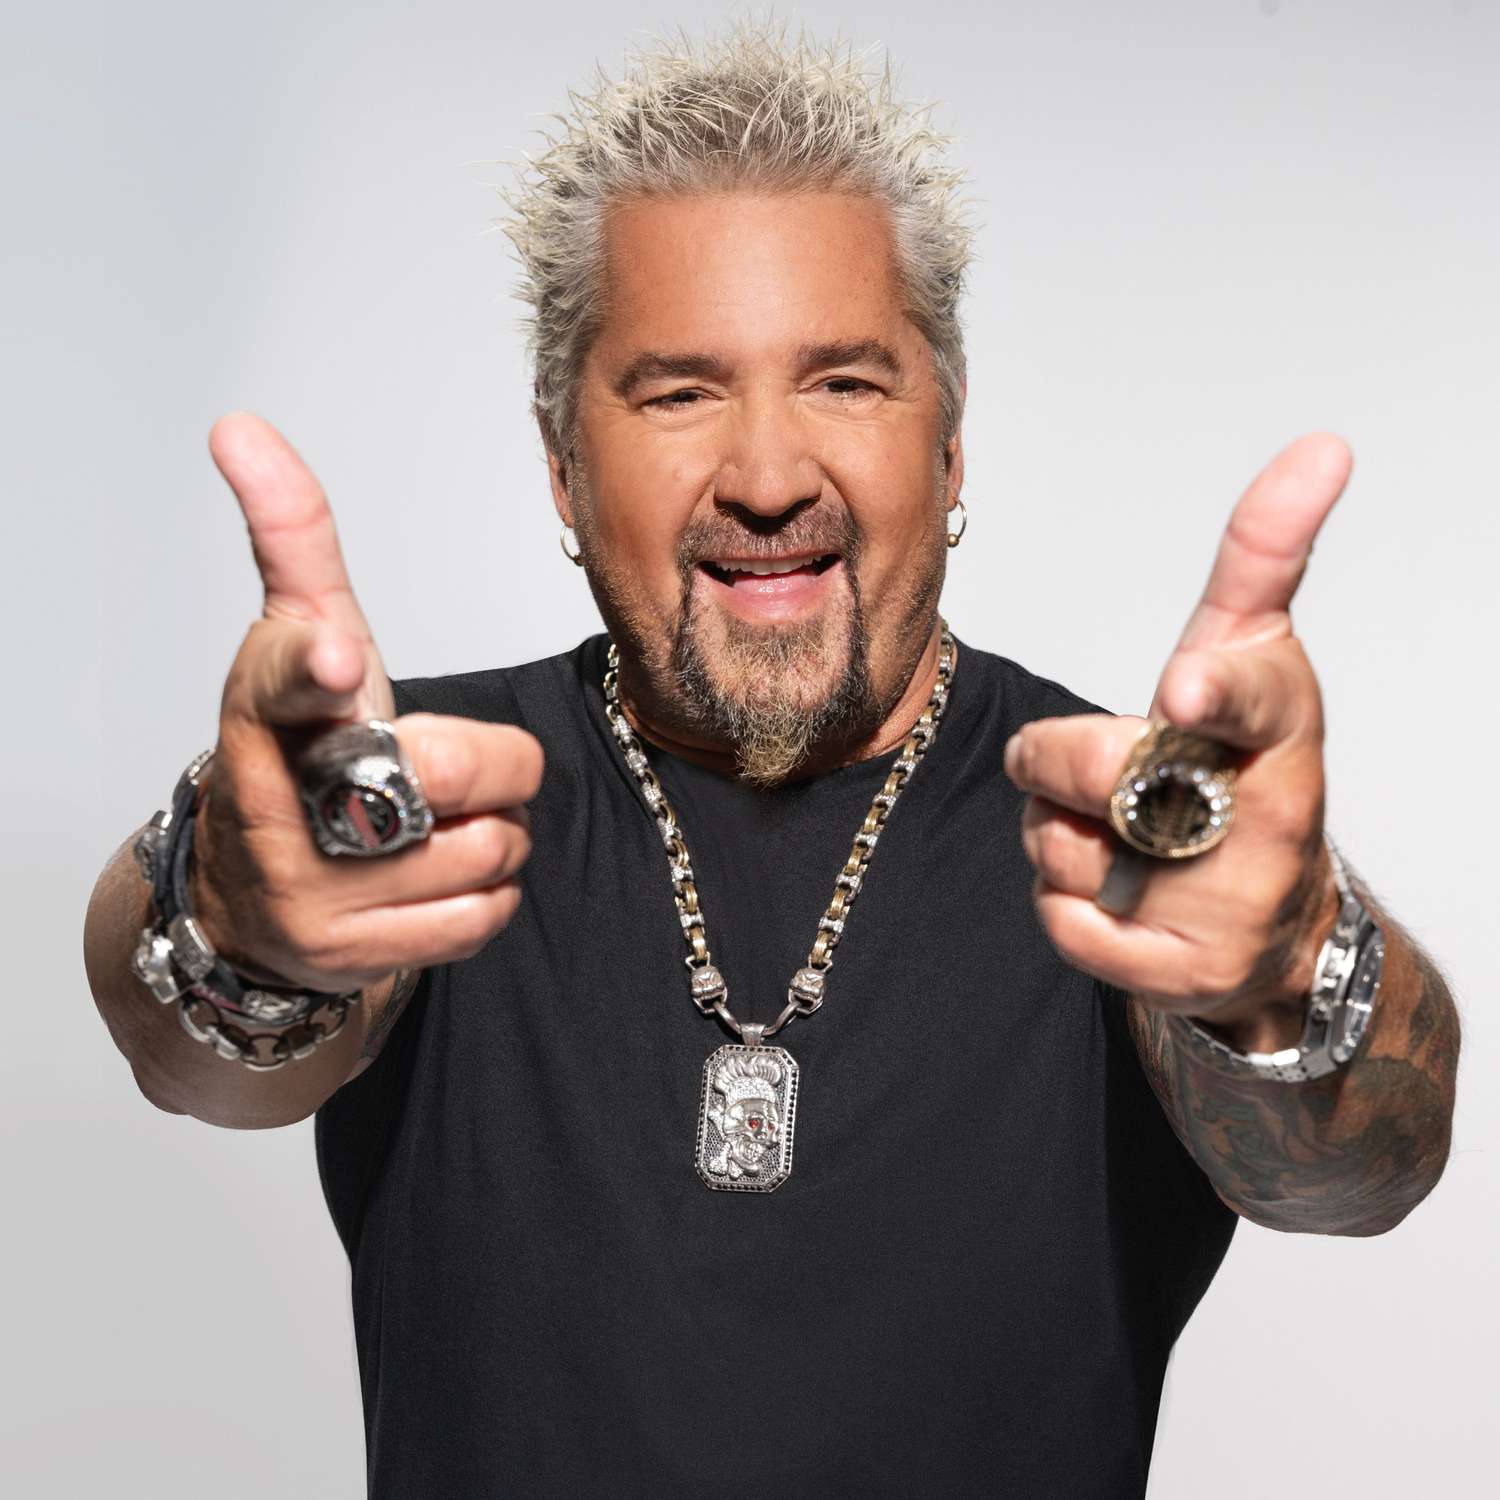 How Guy Fieri Became the Mayor of Flavortown